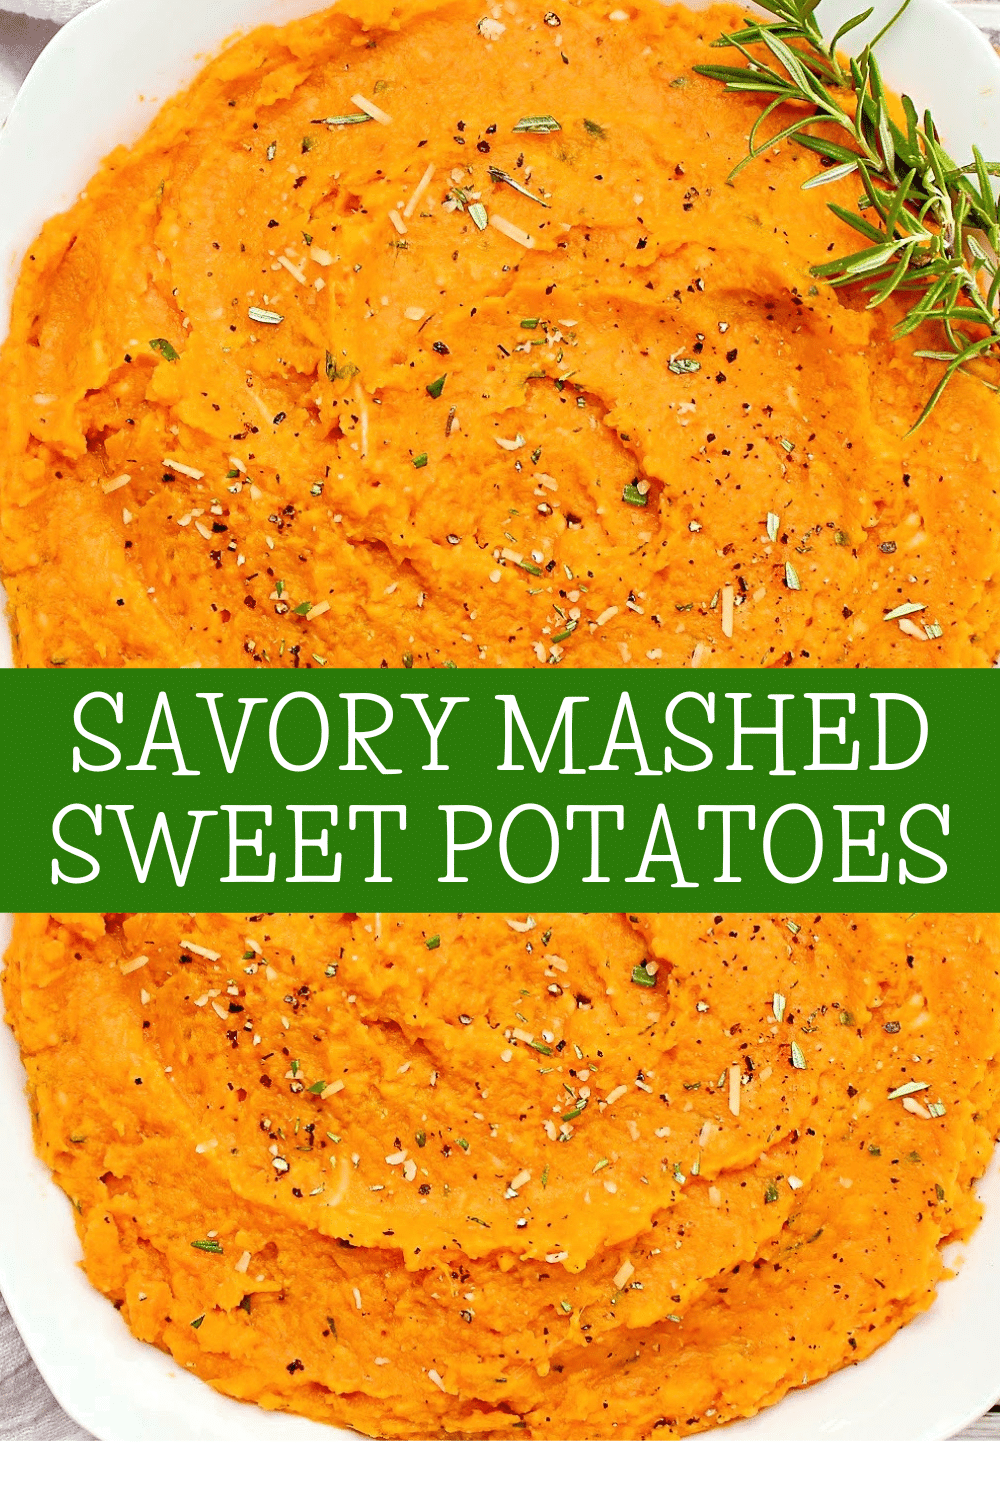 Savory Mashed Sweet Potatoes ~ Bring the natural sweetness of sweet potatoes to the holiday table with this easy recipe! via @thiswifecooks